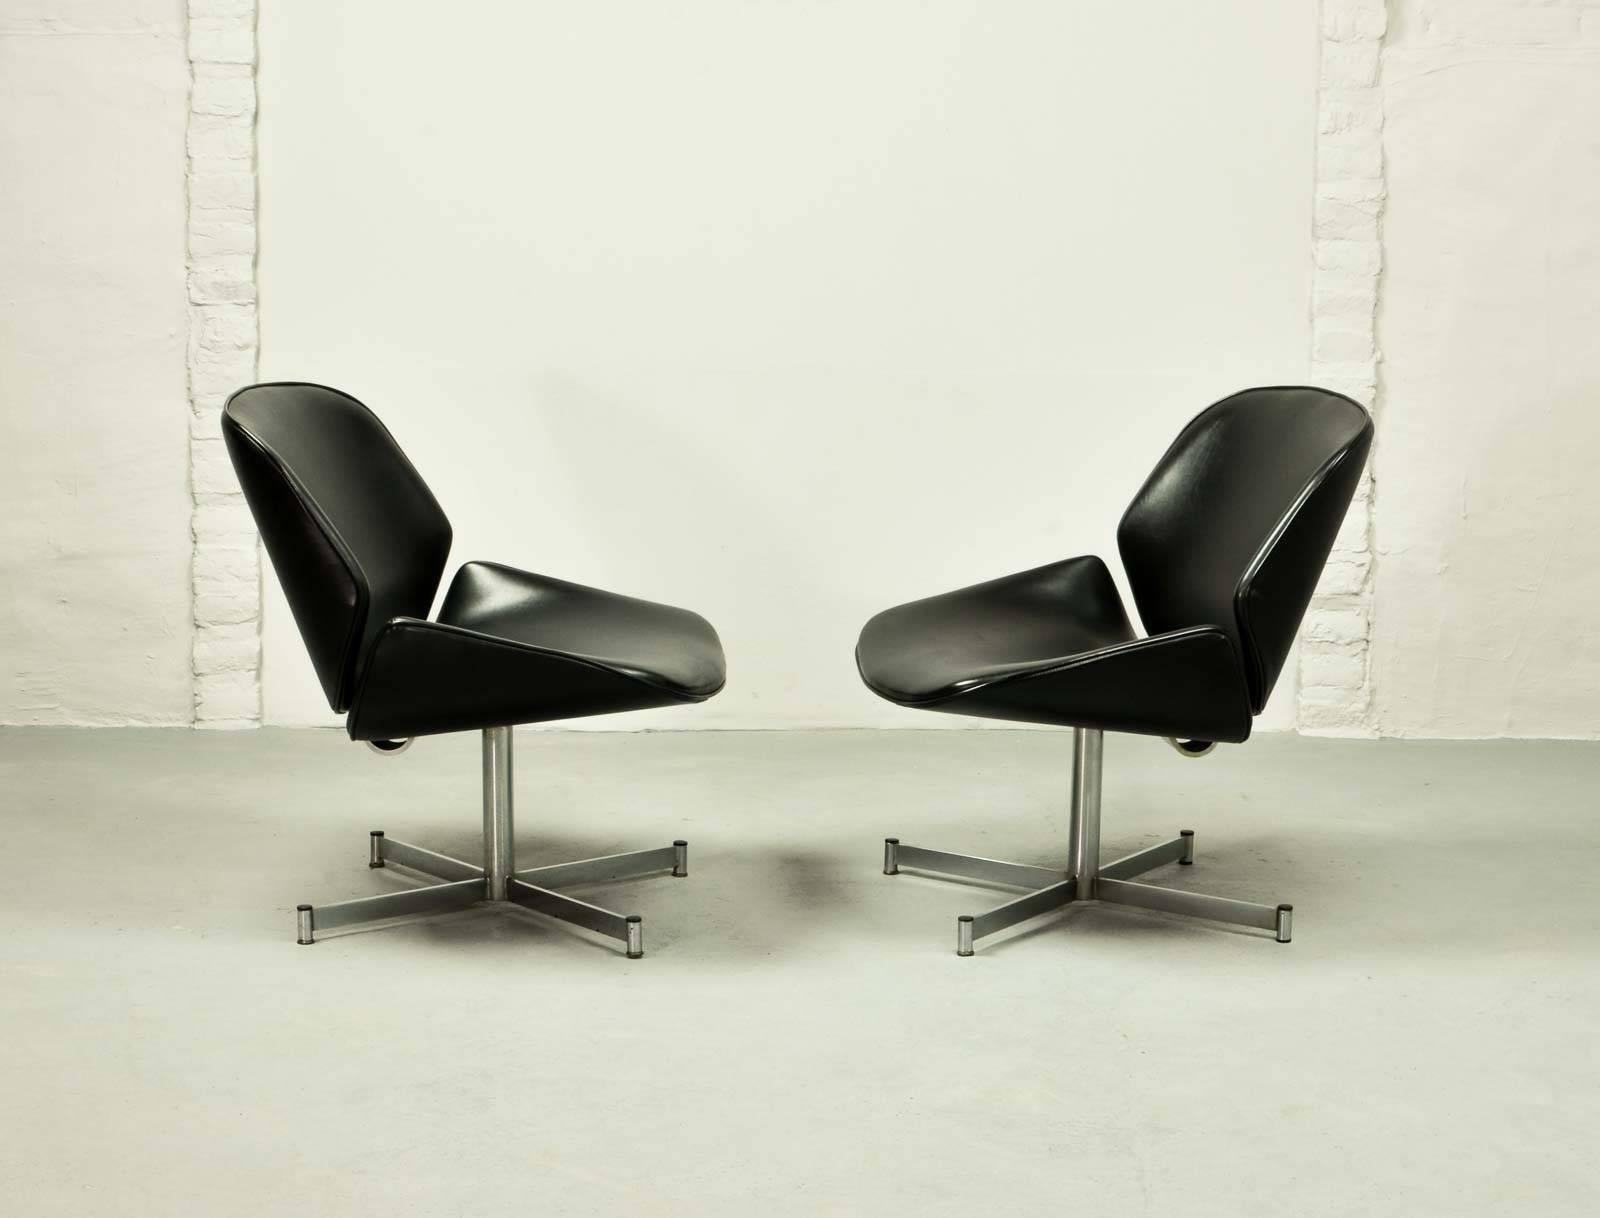 Polished Mid-Century Dutch Design Side Chairs by Geoffrey Harcourt for Exquis / Artifort